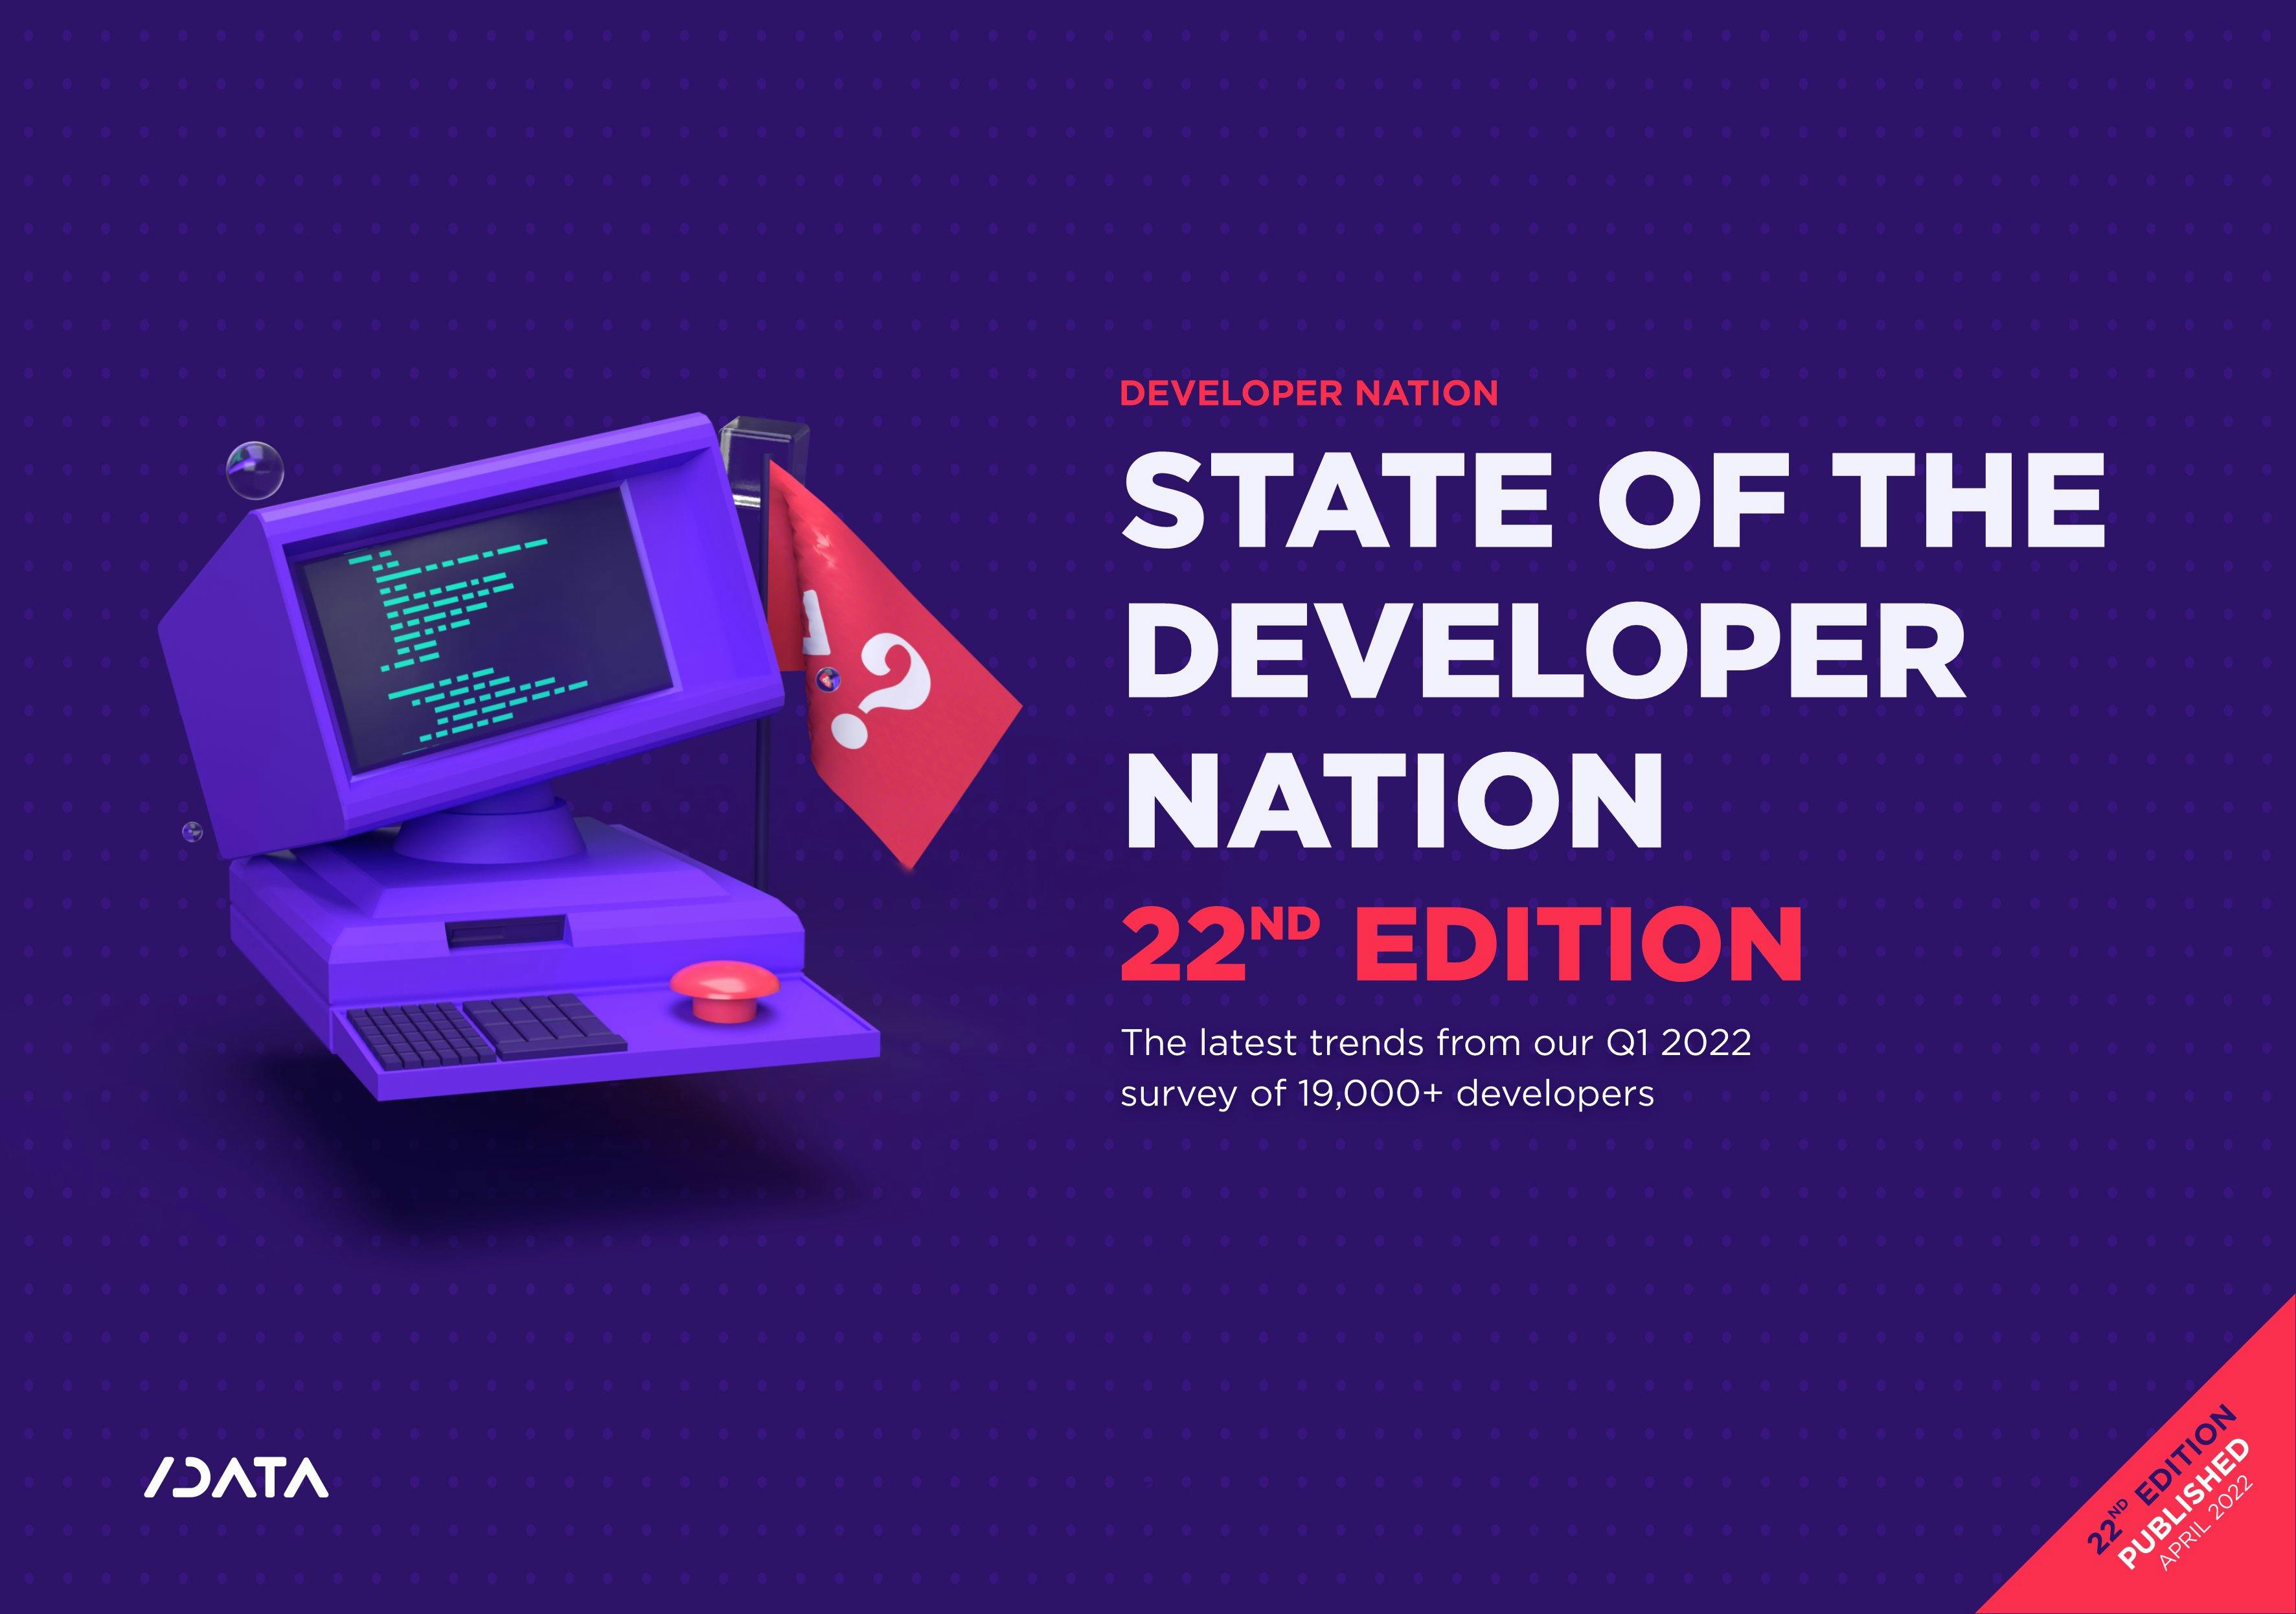 State of the Developer Nation 22nd Edition - Q1 2022